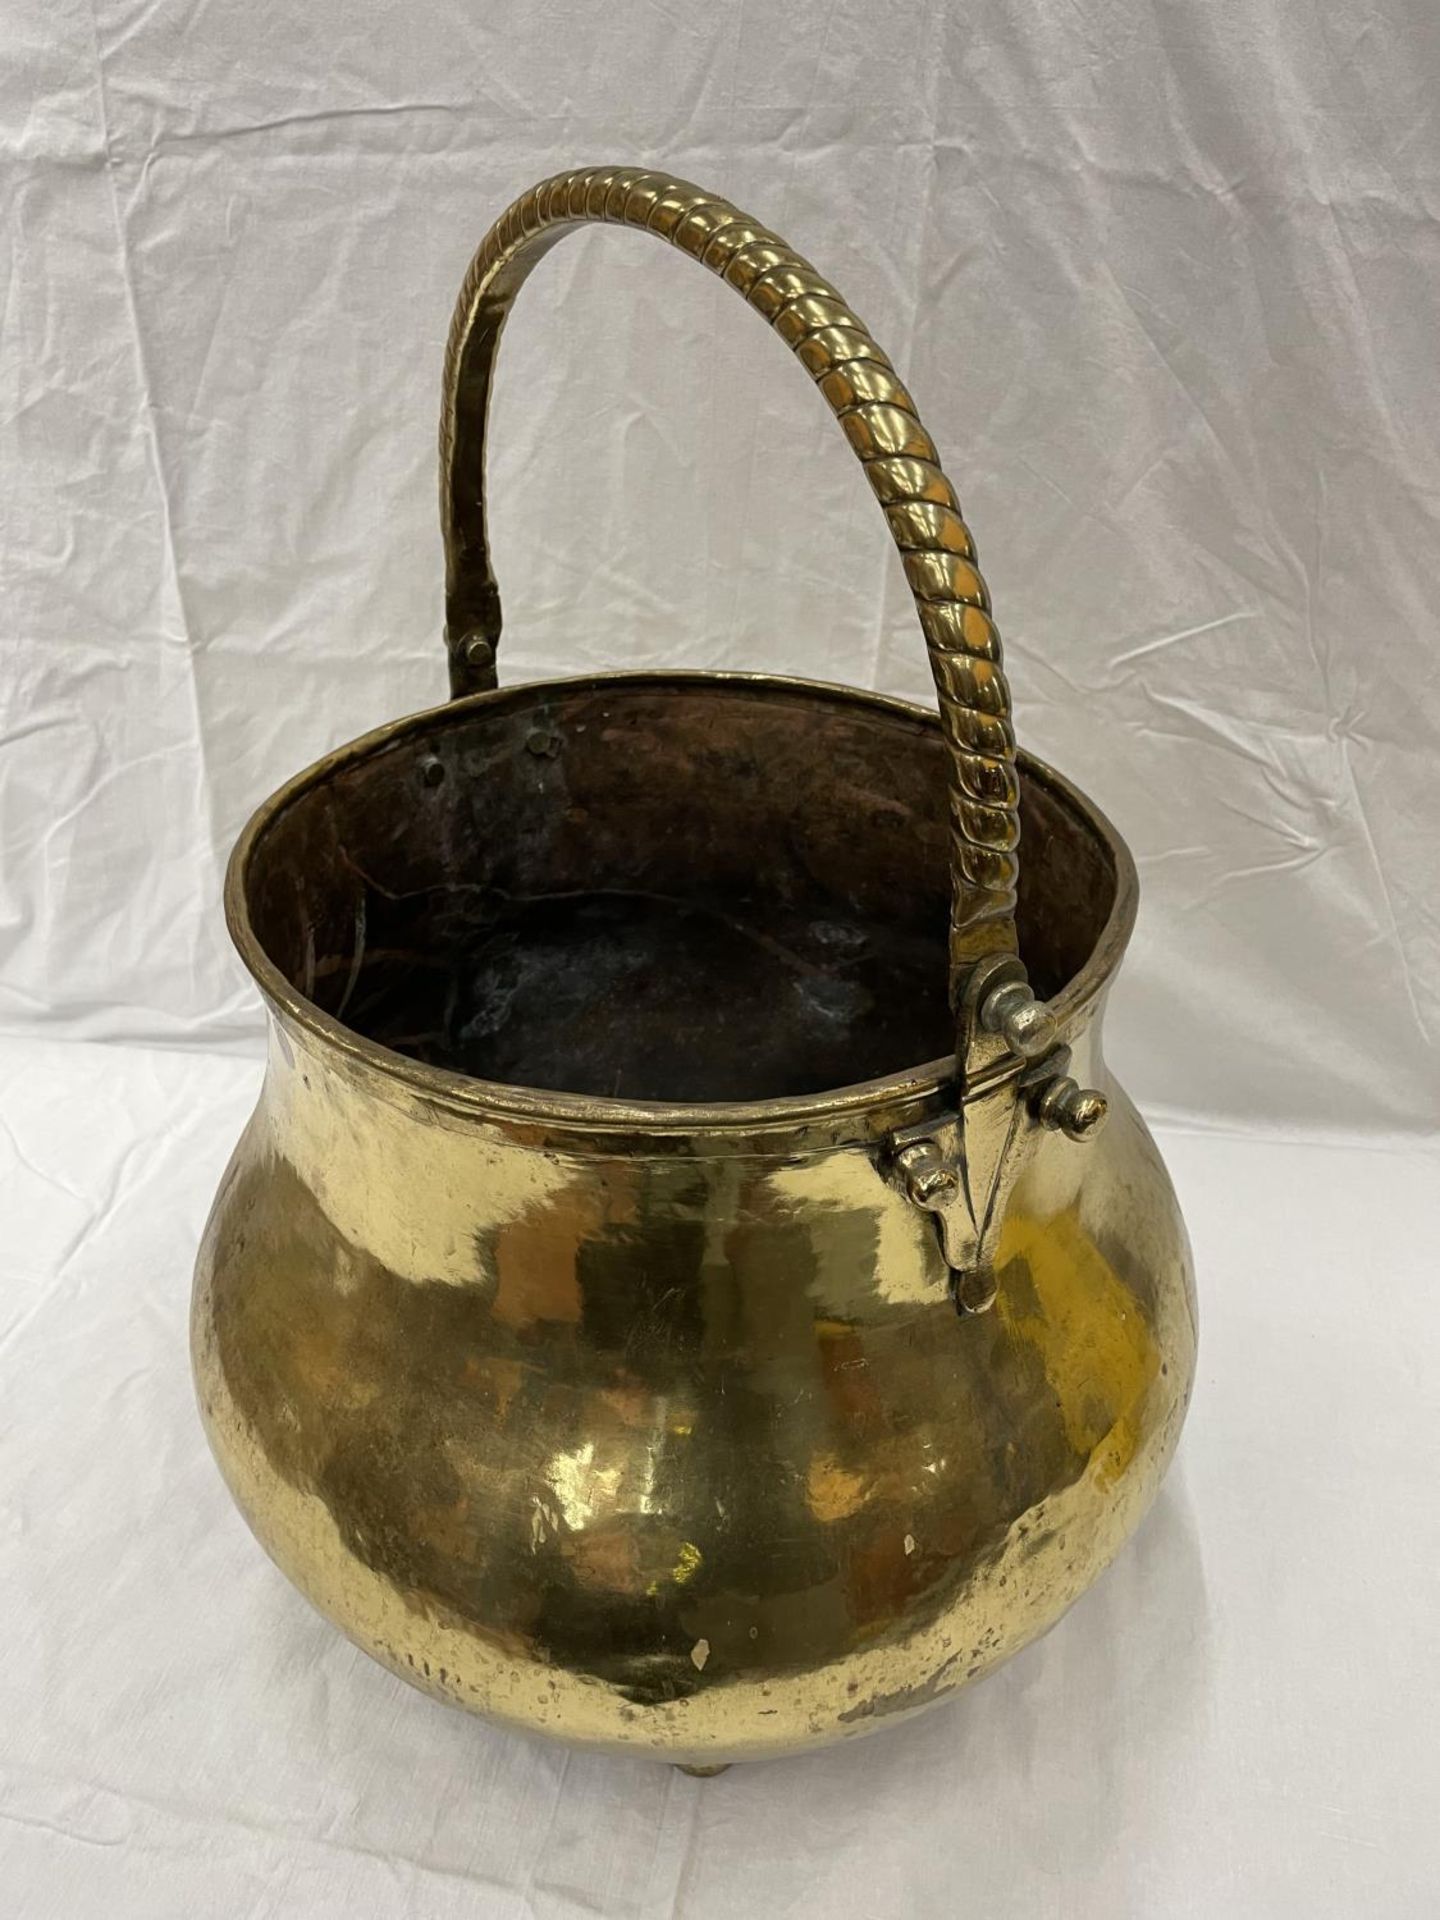 A VERY LARGE BRASS CAULDRON WITH THREE BALL FEET AND A ROPE DESIGN, HANDLE HEIGHT 43CM - Image 3 of 6